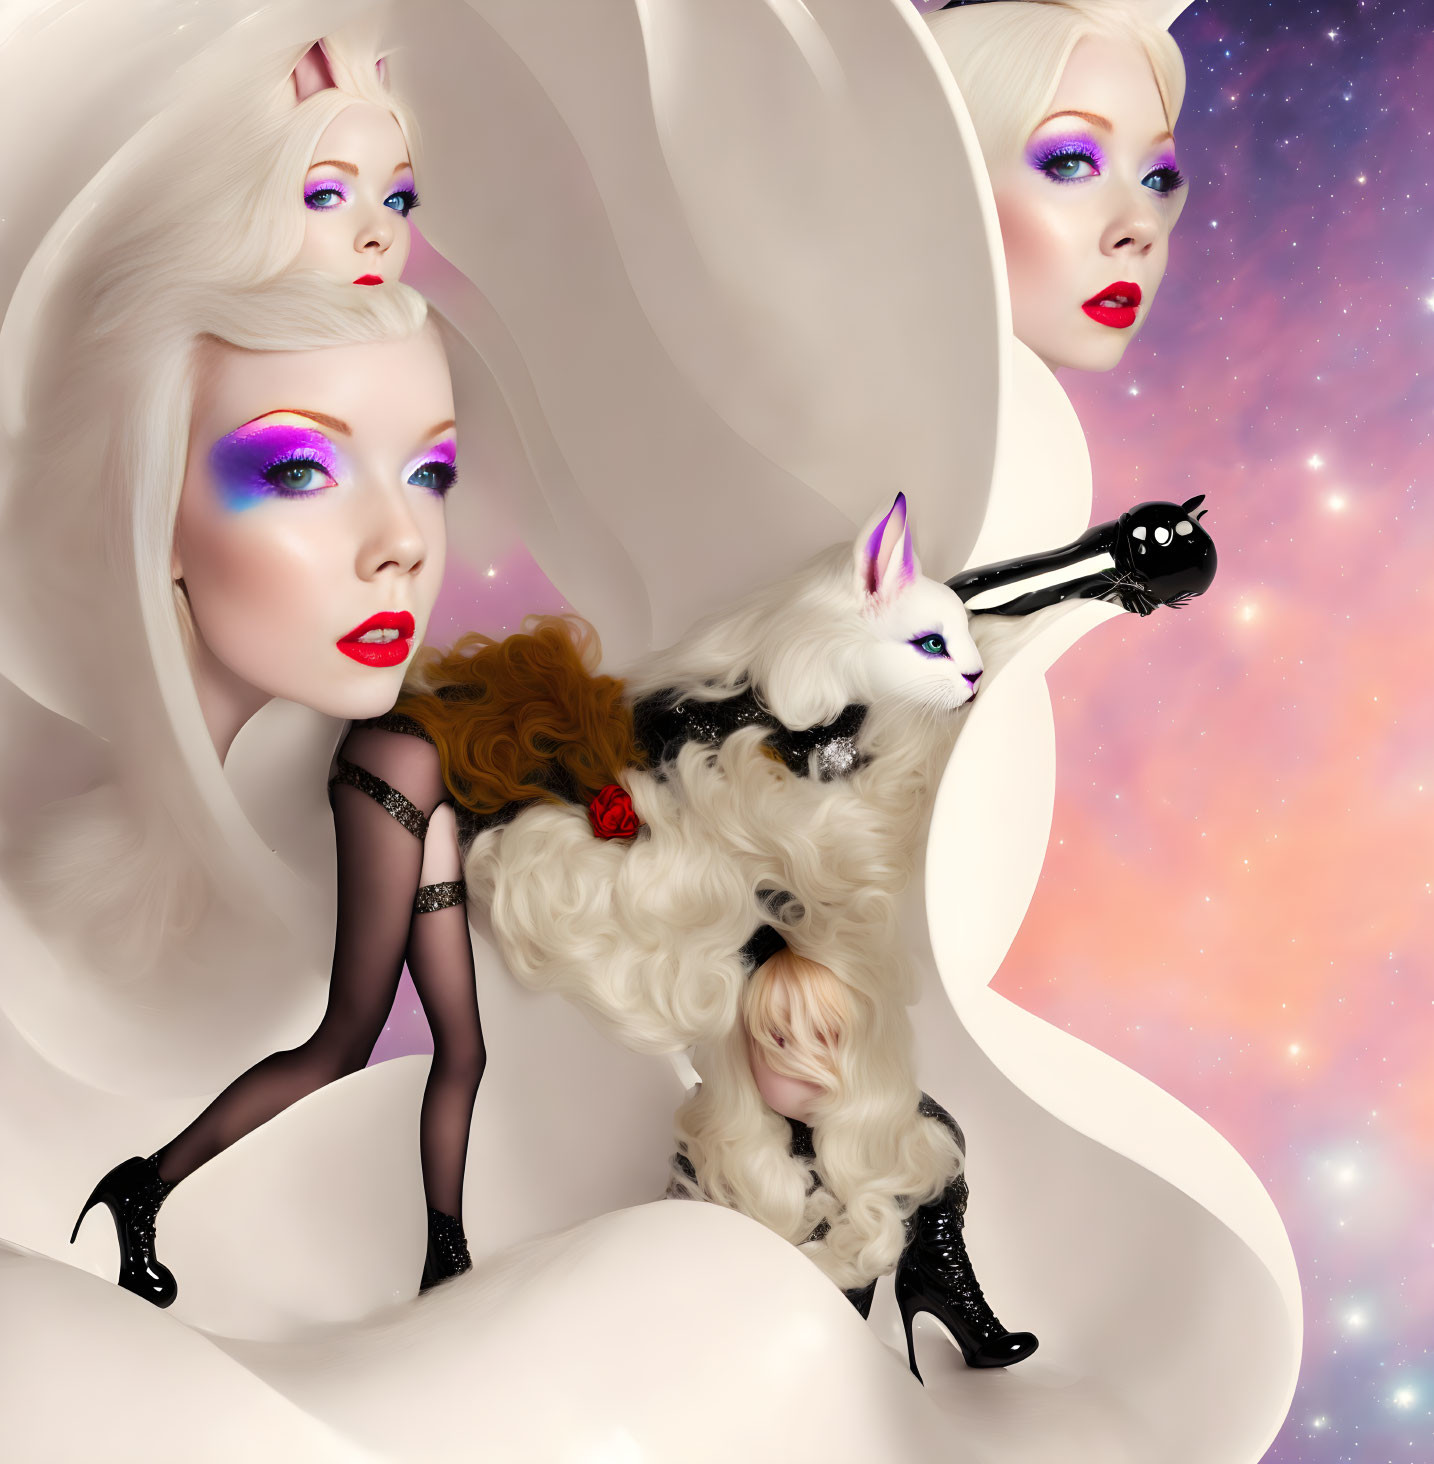 Surreal Artwork: Stylized Women with Pale Hair and White Creature in Cosmic Setting